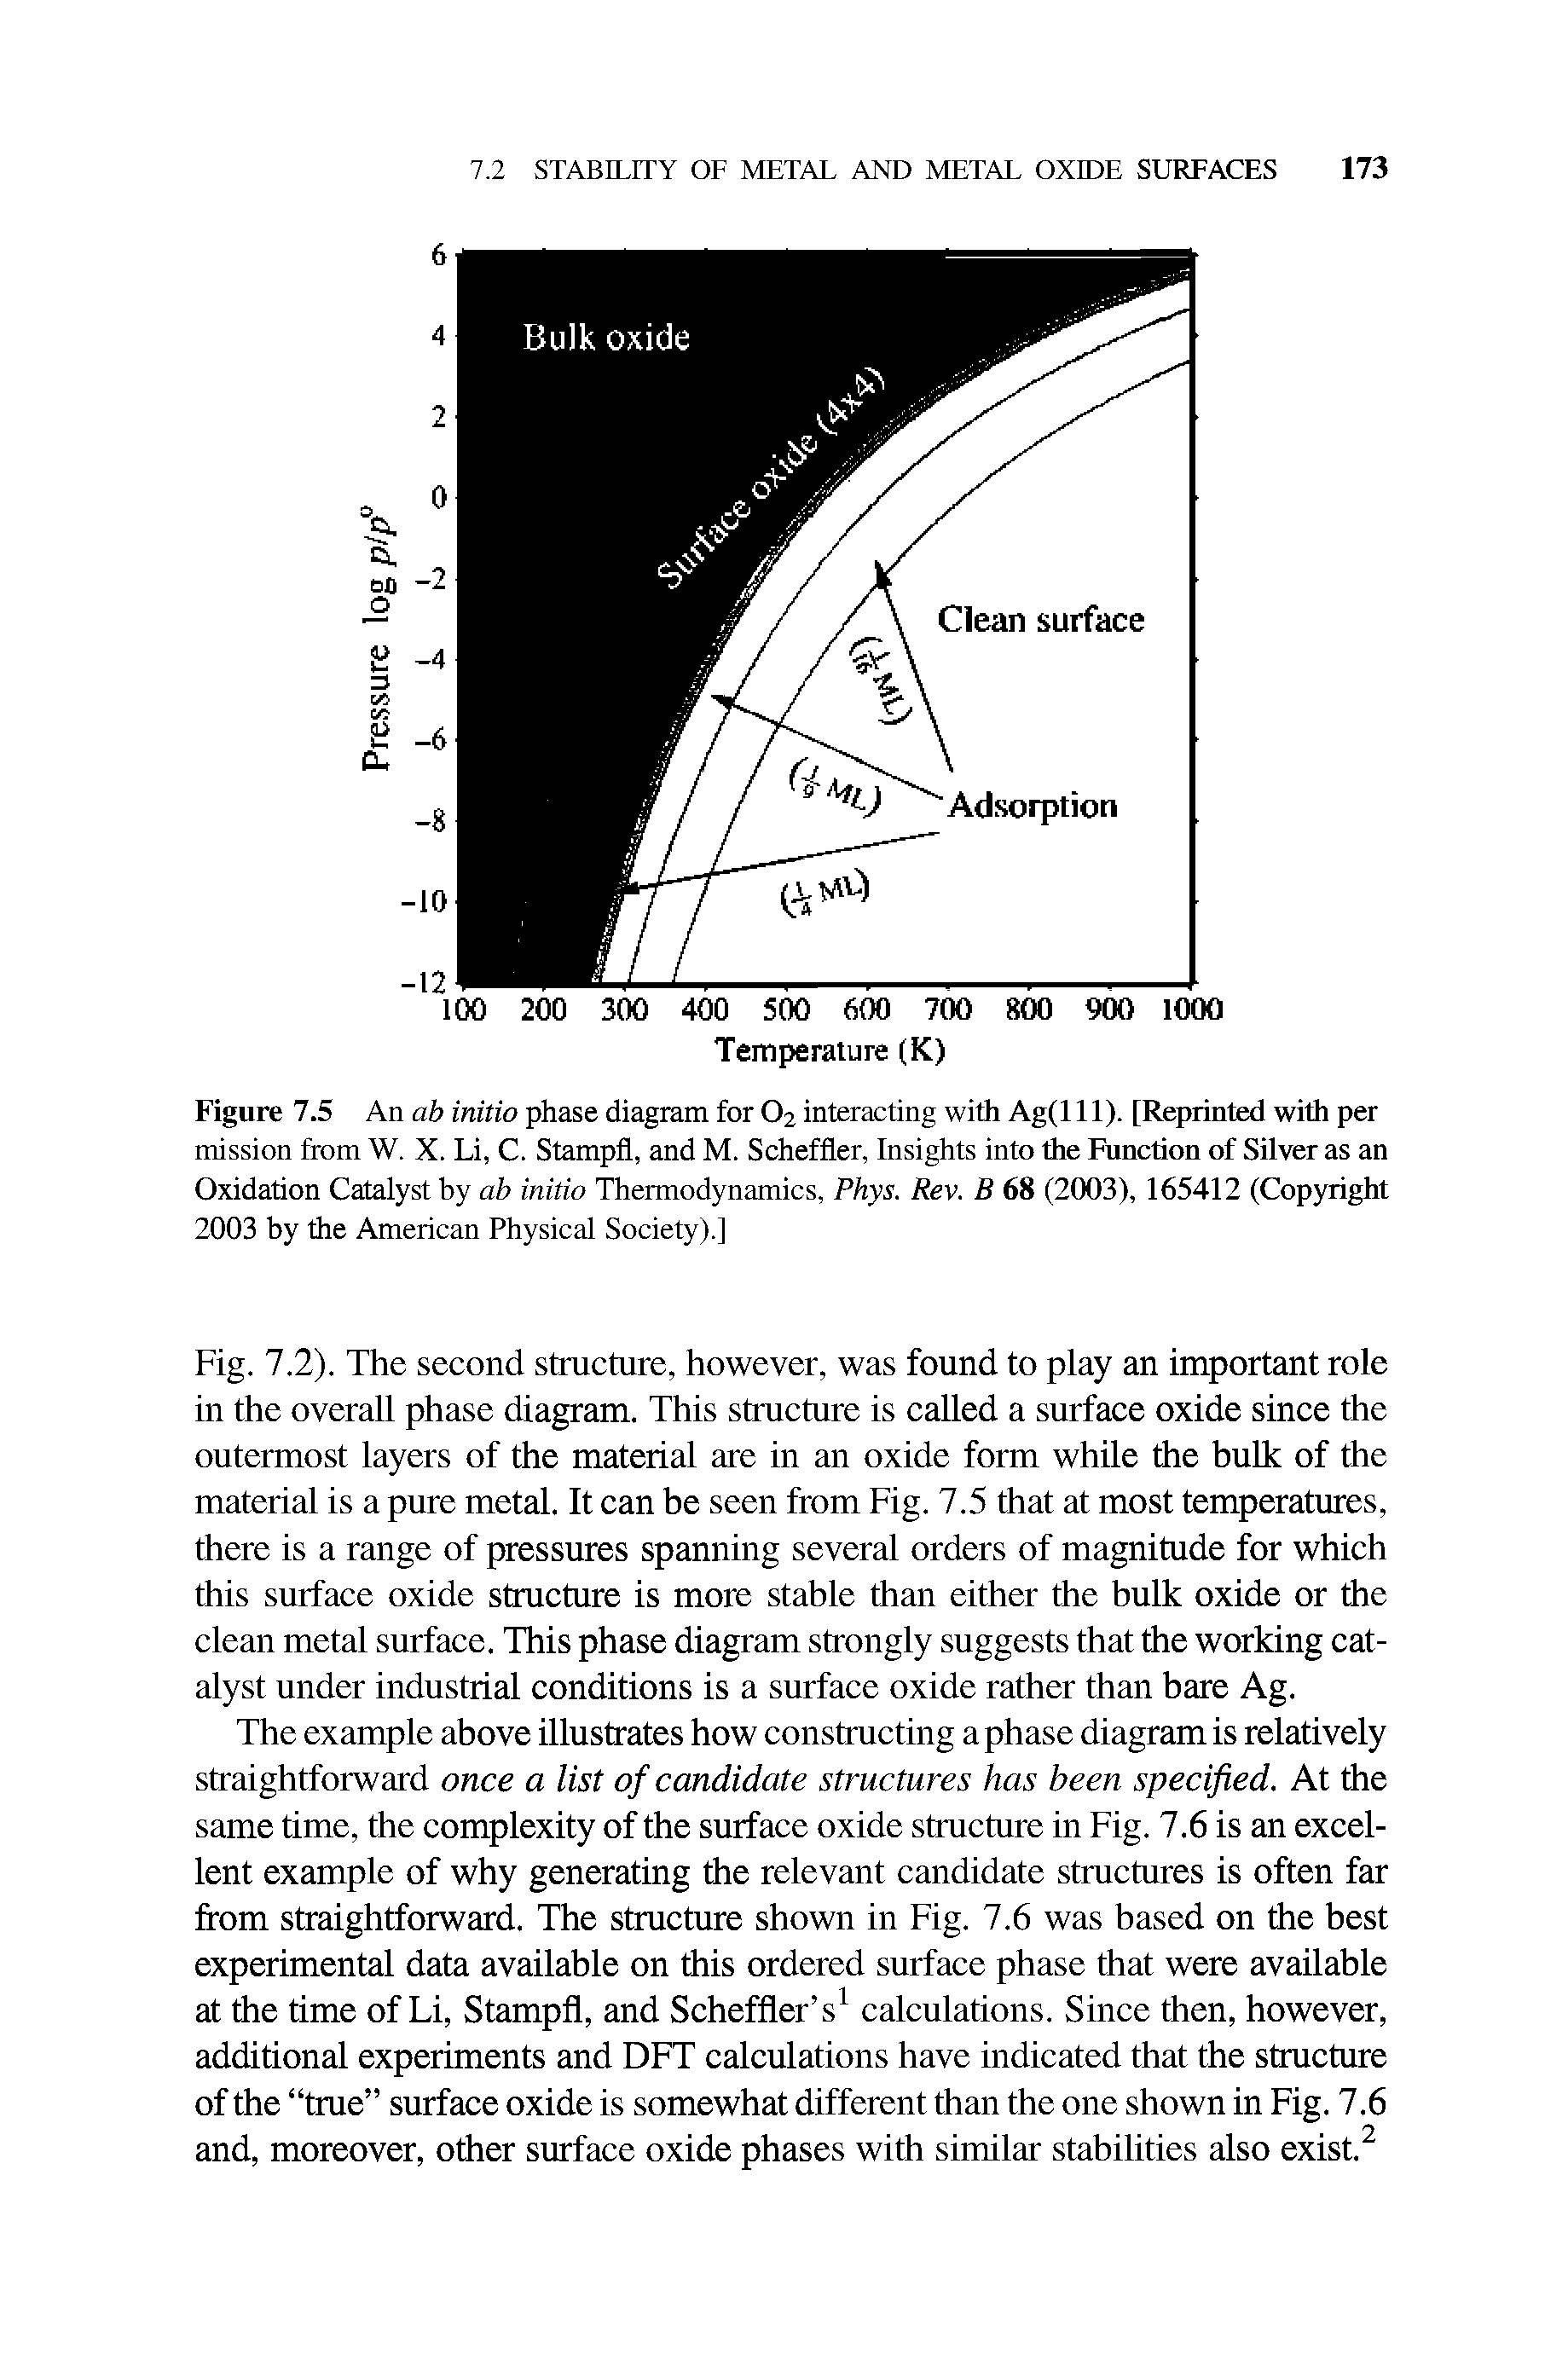 Figure 7.5 An ab initio phase diagram for O2 interacting with Ag(l 11). [Reprinted with per mission from W. X. Li, C. Stampfl, and M. Scheffler, Insights into the Function of Silver as an Oxidation Catalyst by ab initio Thermodynamics, Phys. Rev. B 68 (2003), 165412 (Copyright 2003 by the American Physical Society).]...